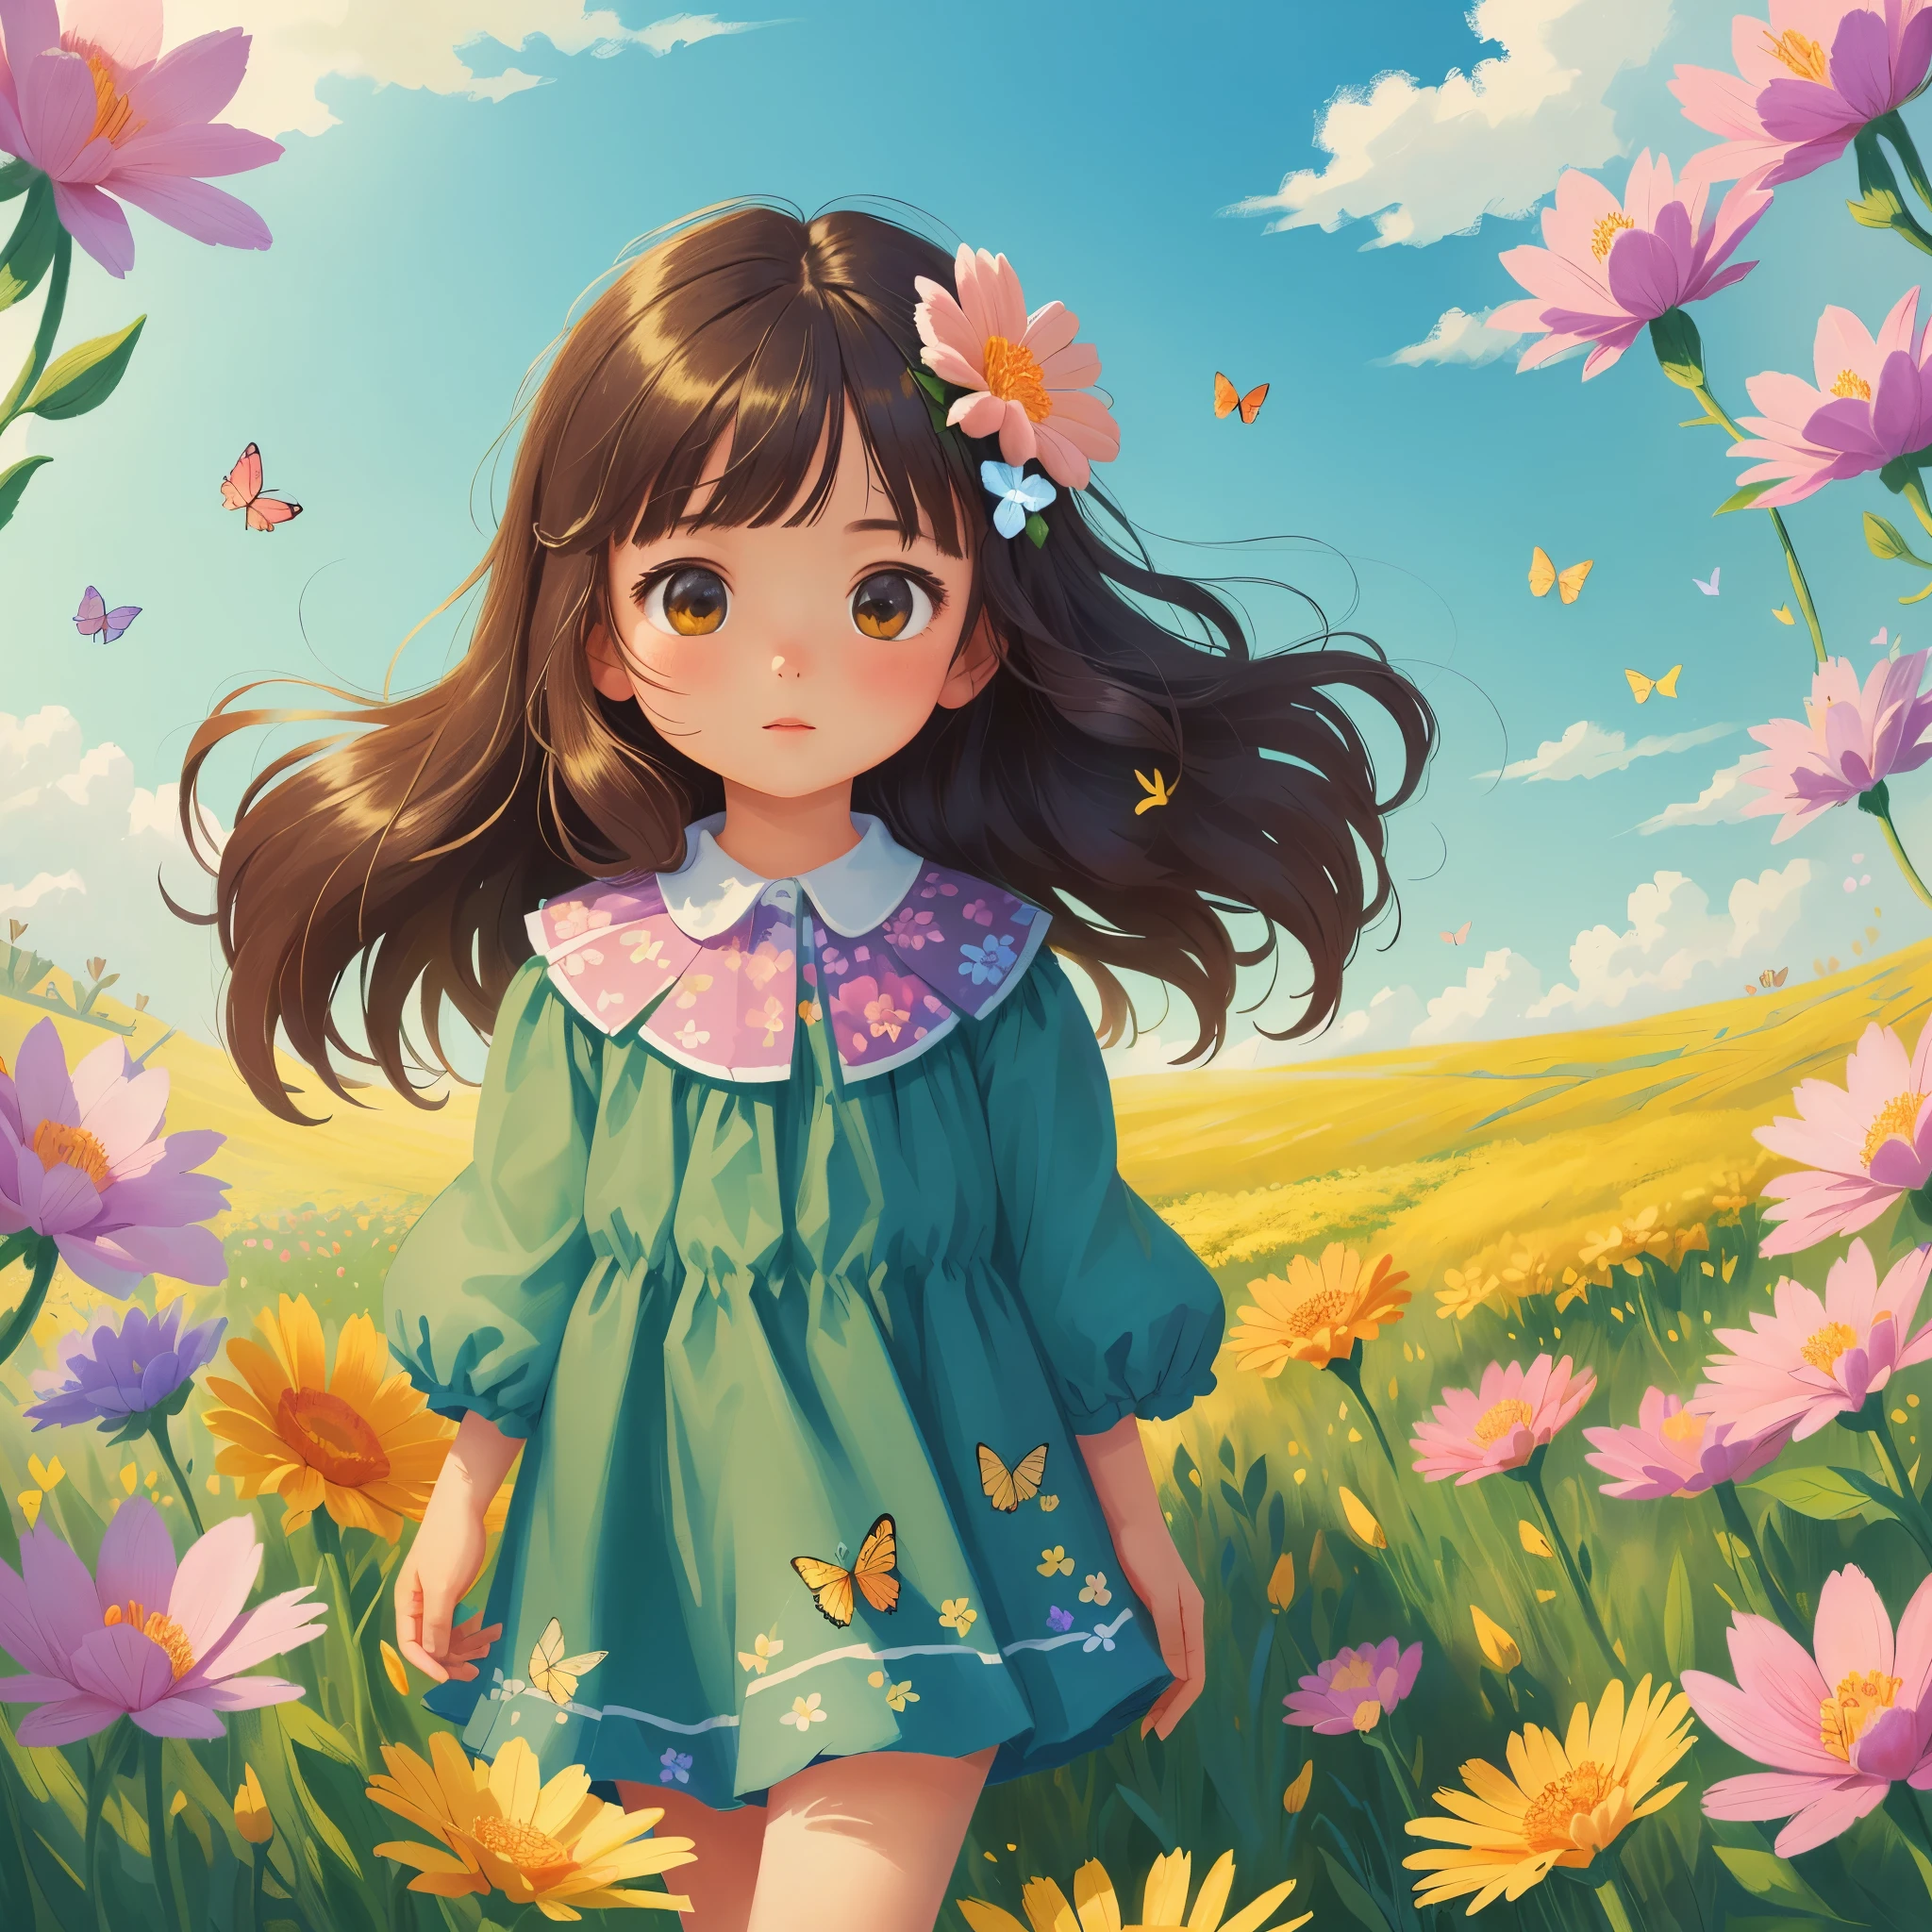 (best quality, masterpiece), 1 girl , wind, in a field of blooming flowers,（surrounded by flowers），Butterflies flying，（Sea of flowers）,flower field，Densely packed flowers， Bright and delicate flowers，Close-up of flowers， cartoon, colorful，